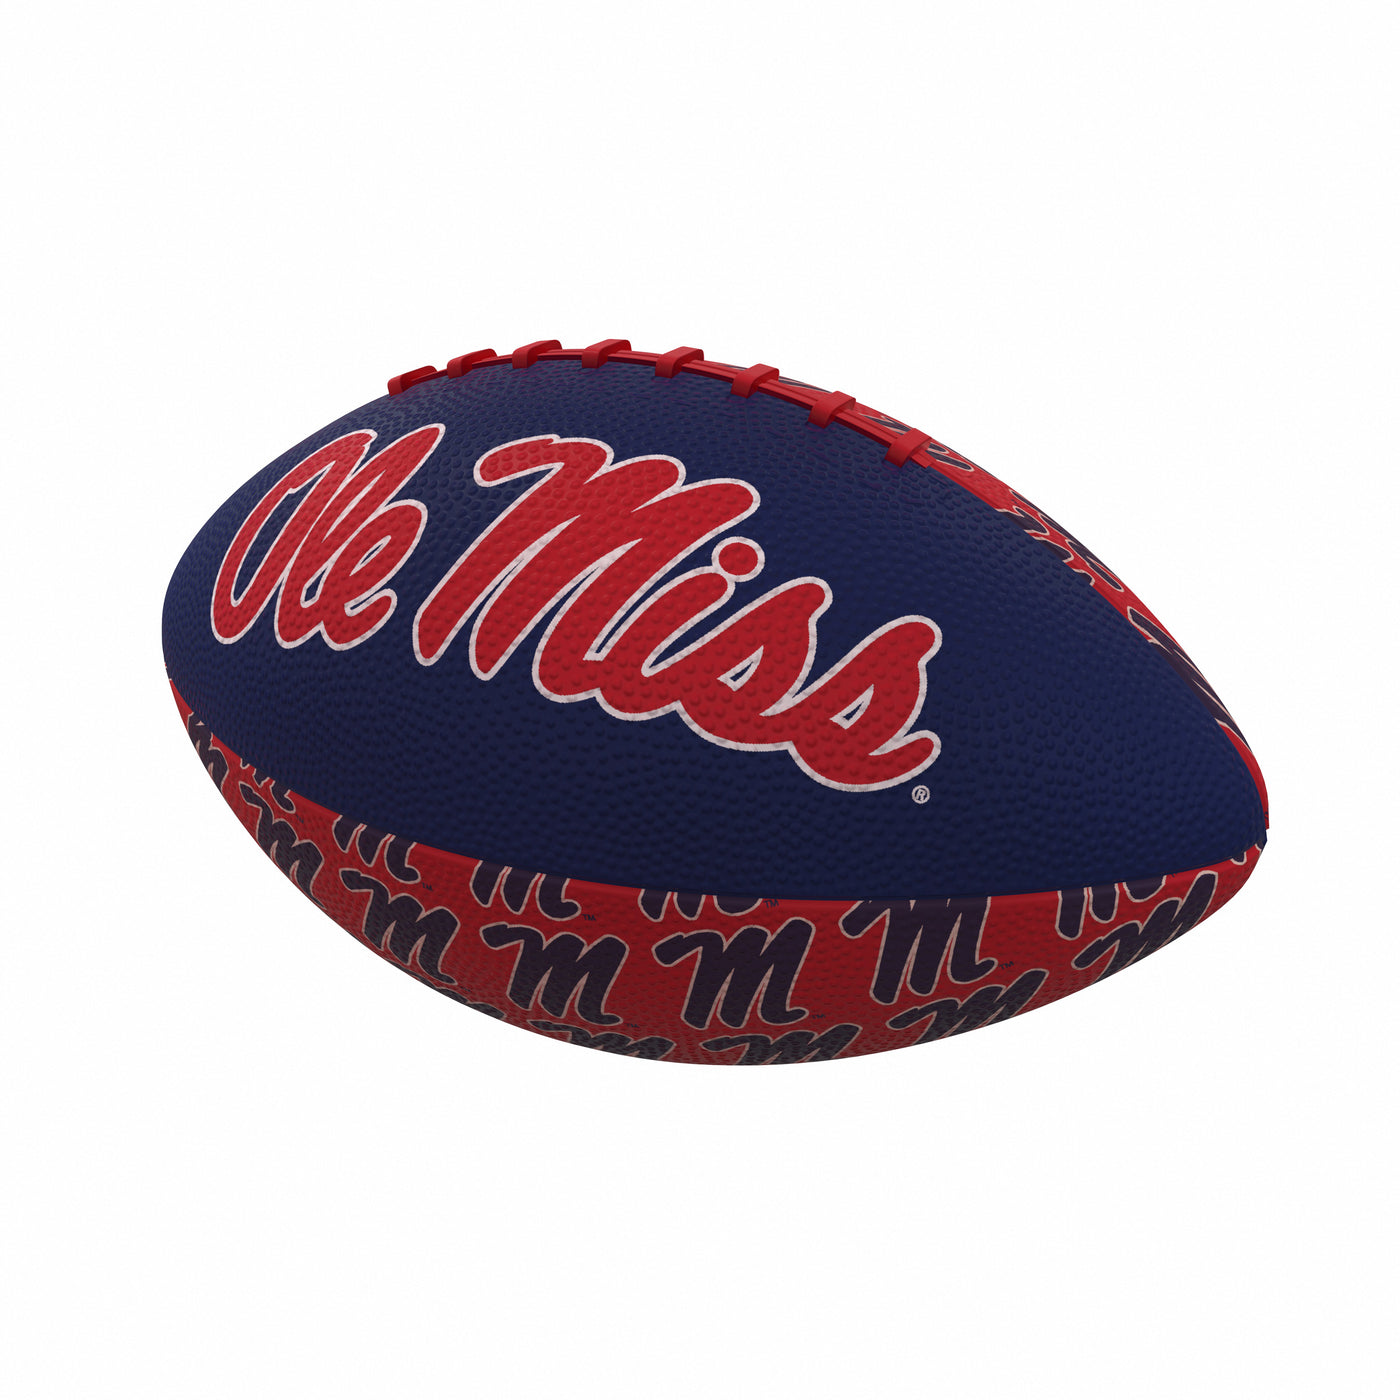 Ole Miss Repeating Mini-Size Rubber Football